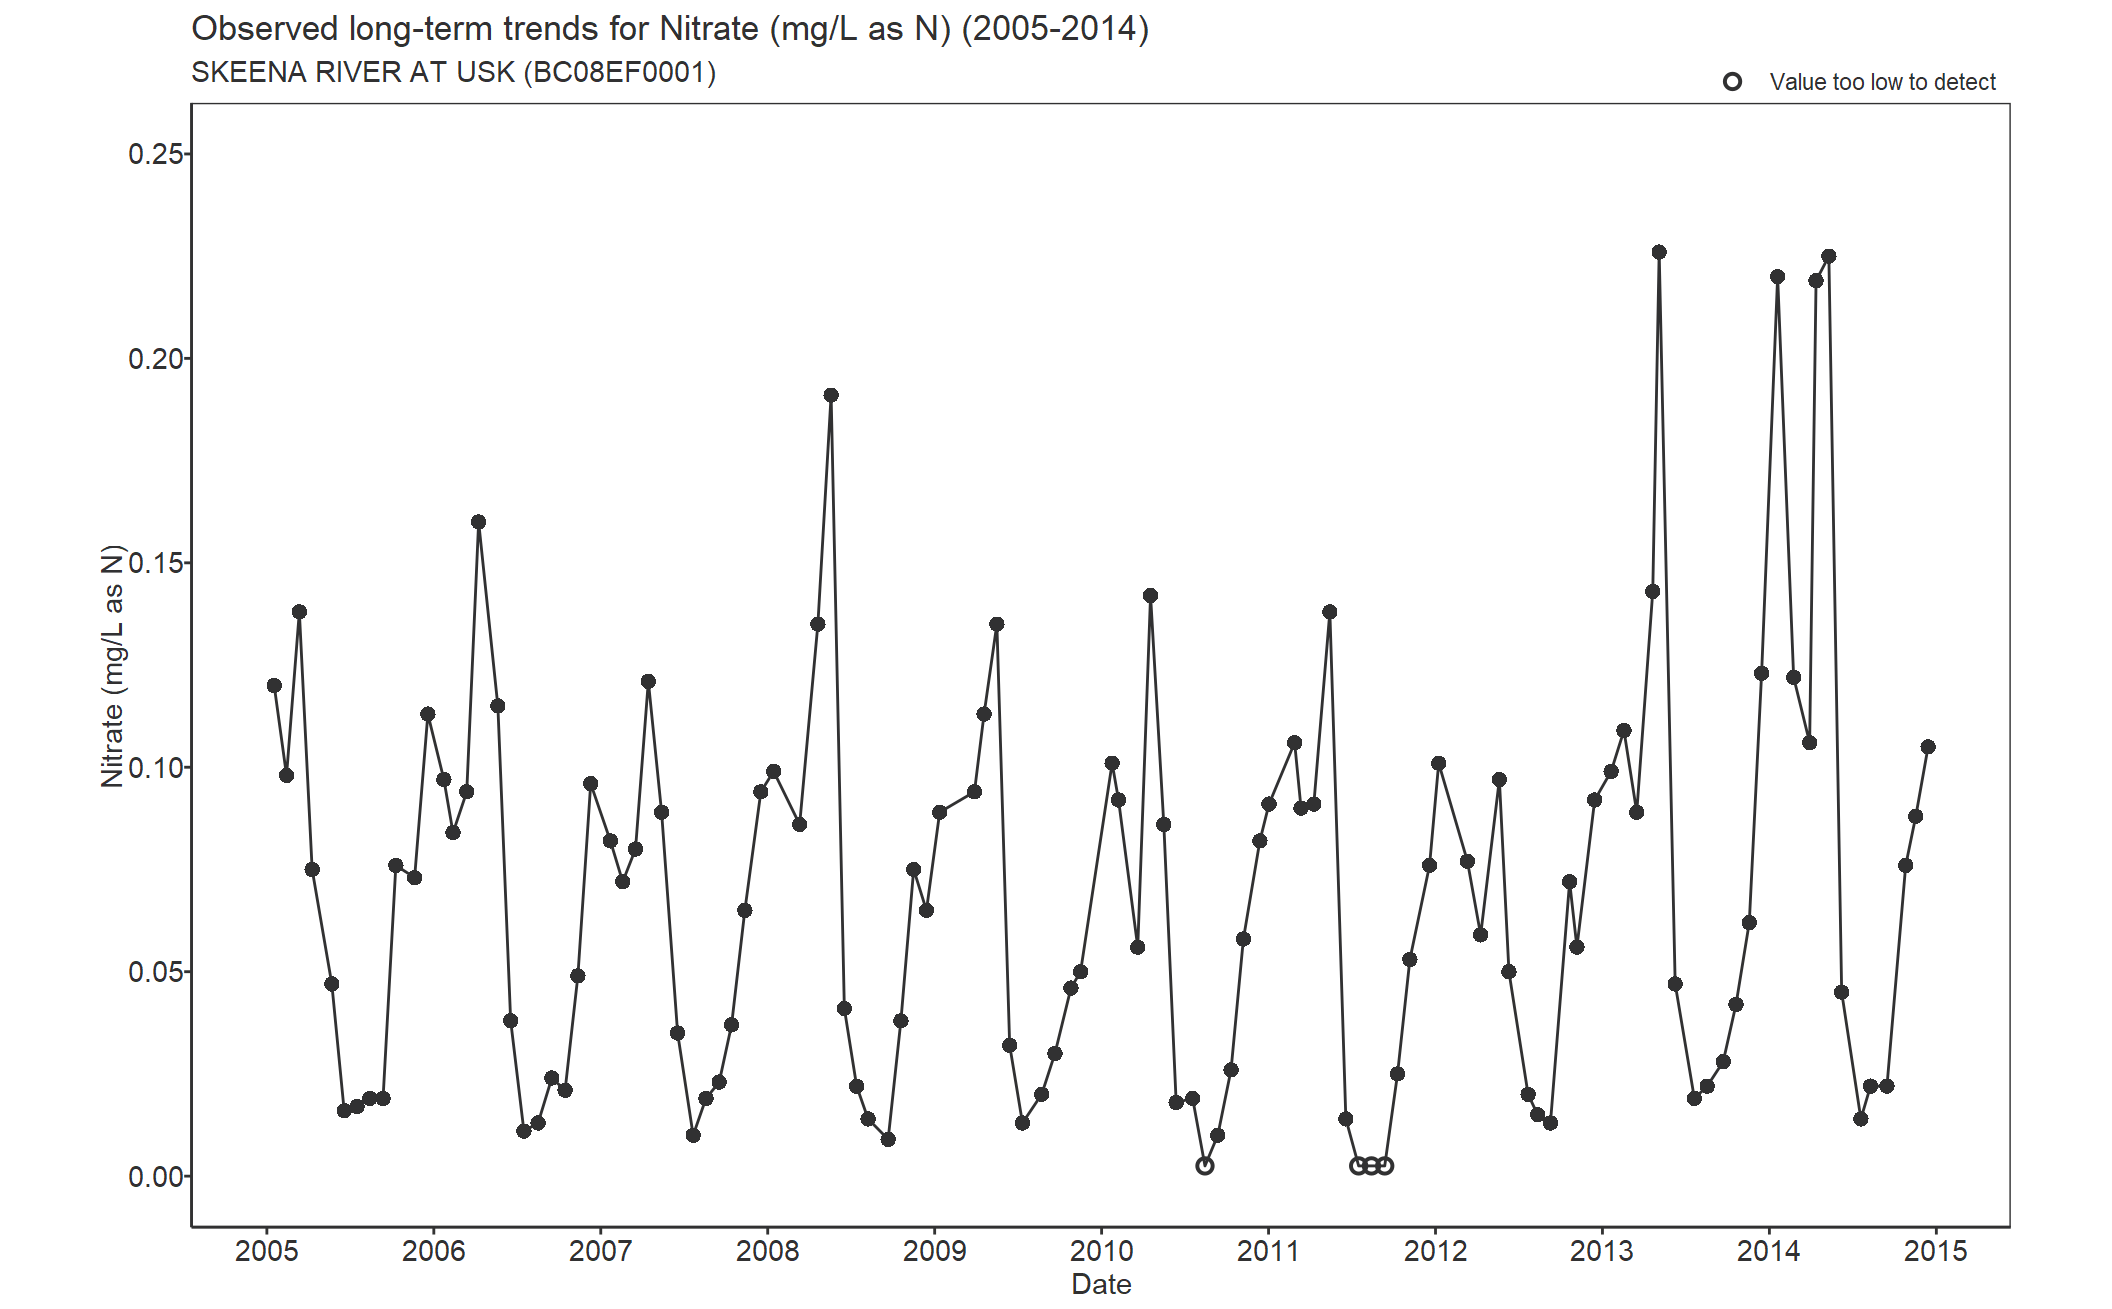 Observed long-term trends for Nitrate (2005-2014)